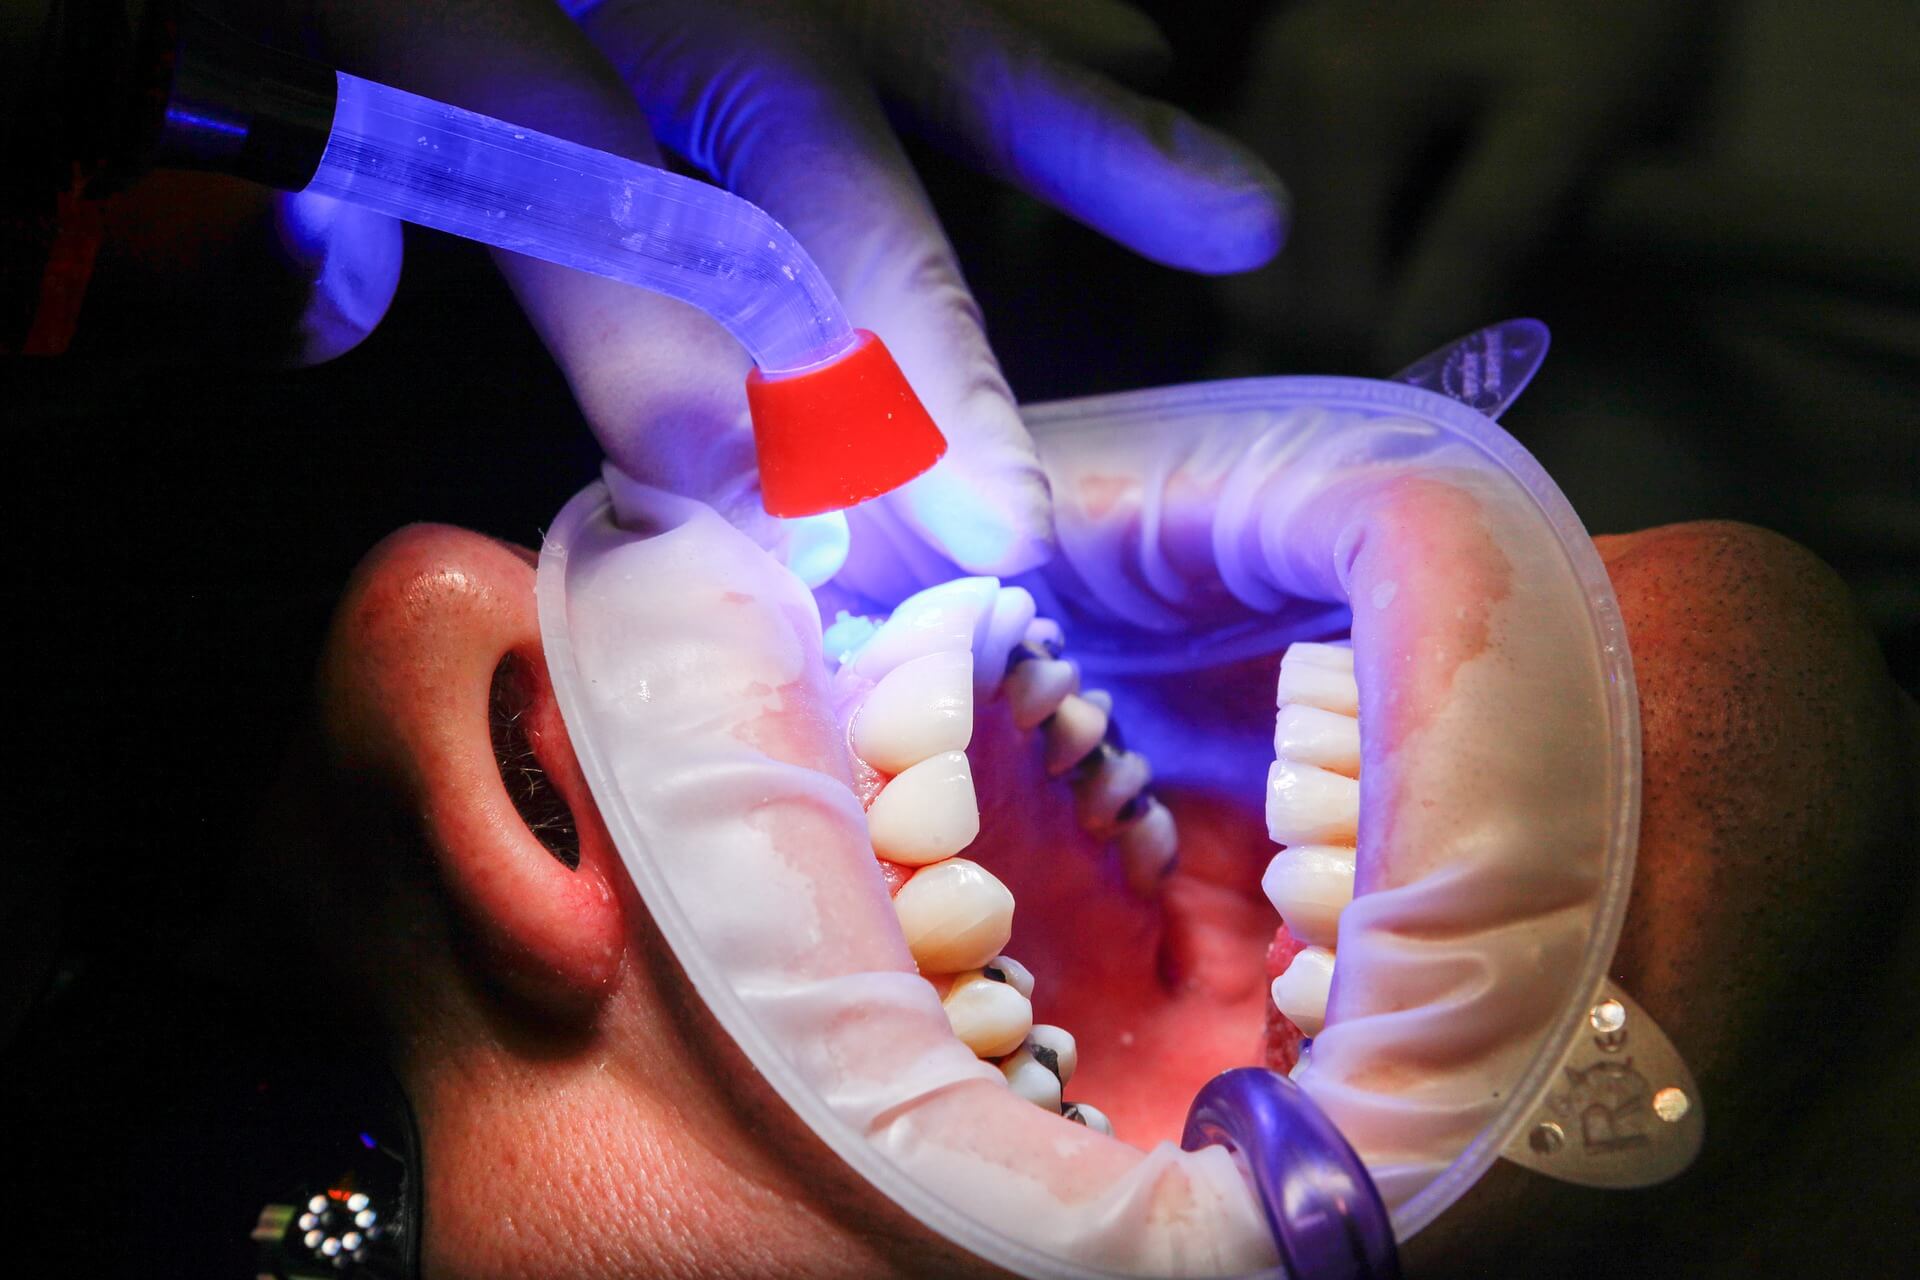 Synchrotron light makes teeth whitening treatments faster and safer